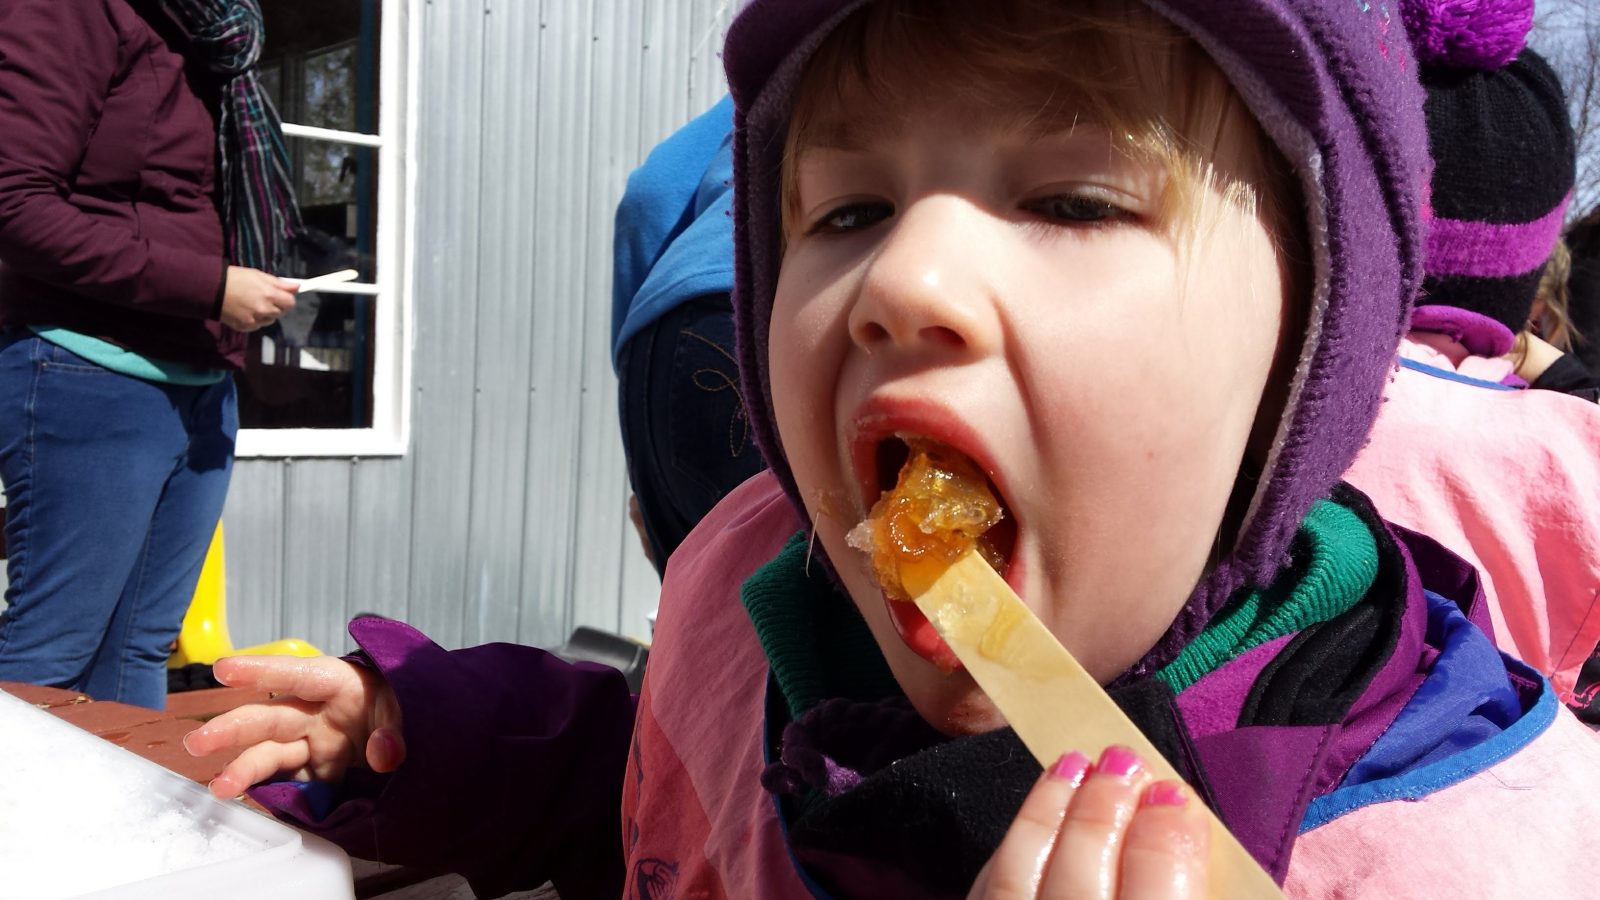 Sweet success: maple producers celebrating a sugary spring